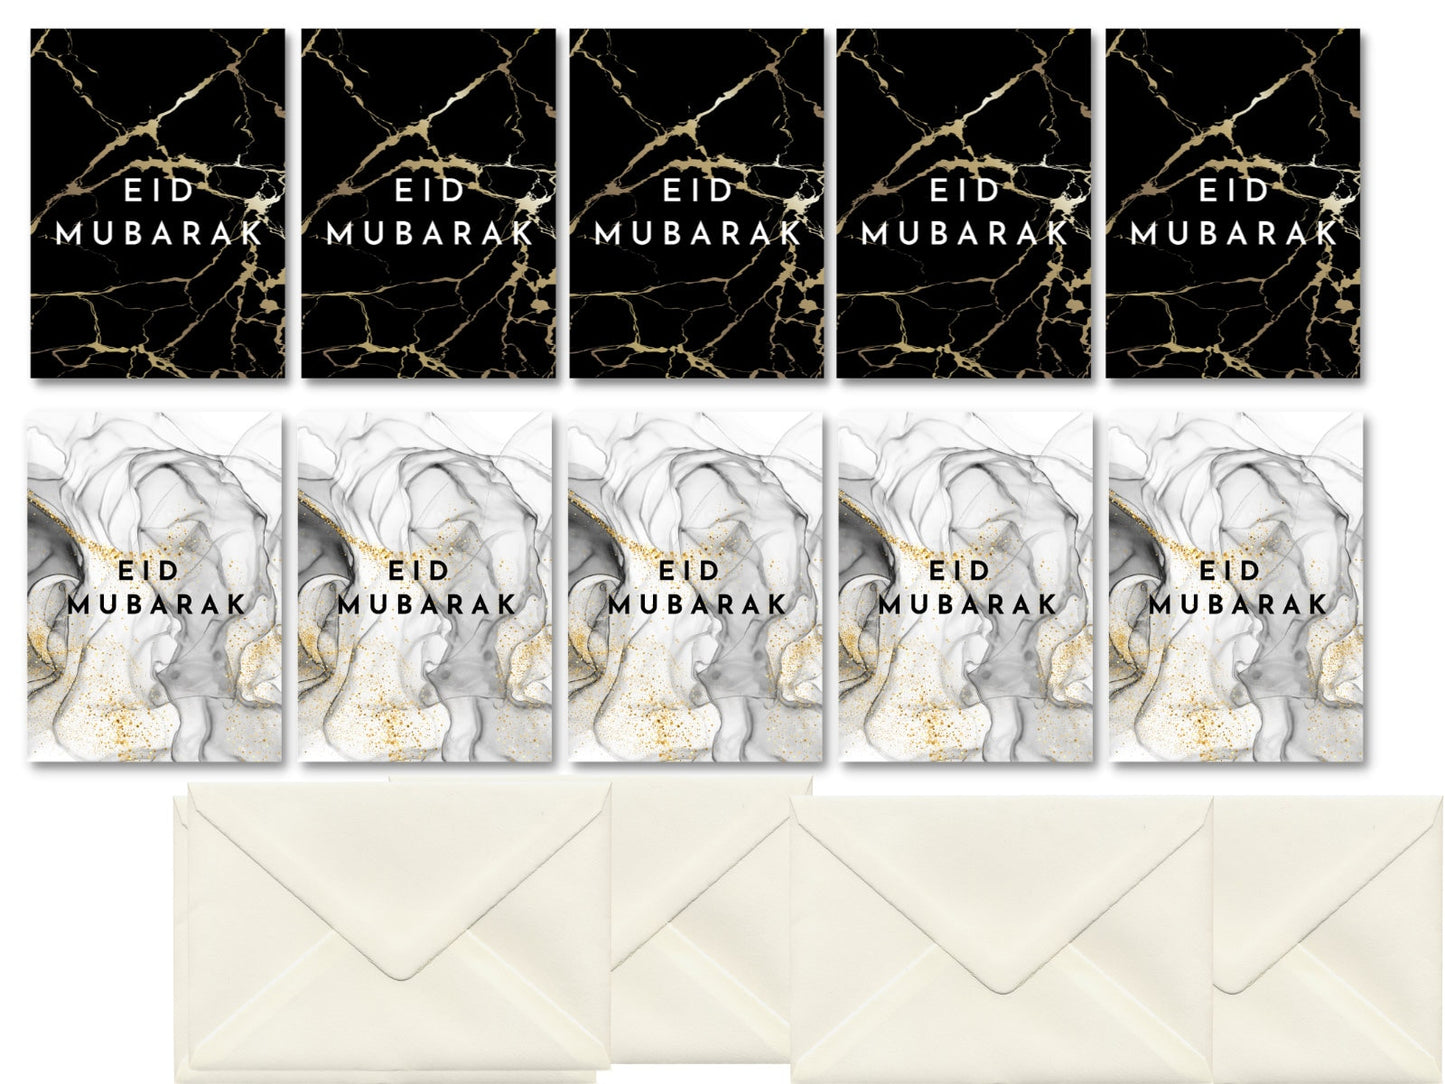 Pack of 10 Eid Mubarak greeting cards, 5 black and 5 grey with 10 envelopes, Great value Eid Mubarak cards with envelope